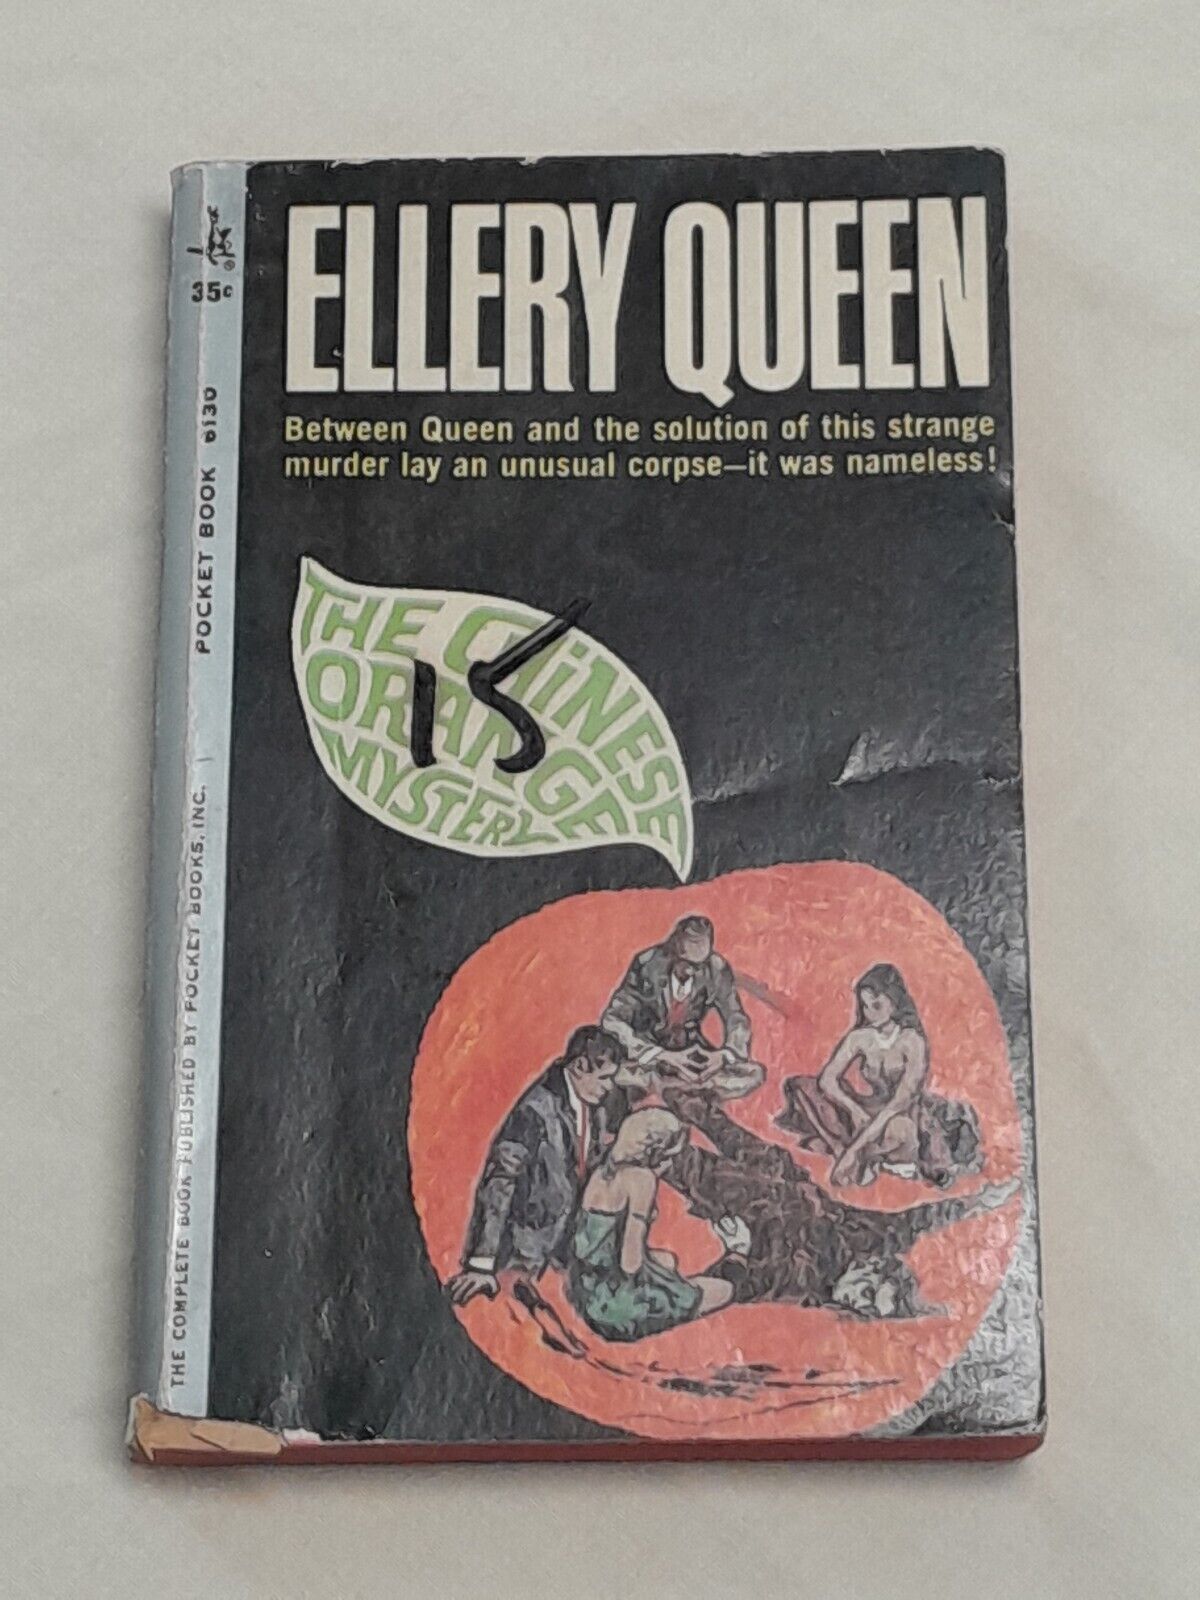 1962 The Chinese Orange Mystery by Ellery Queen 27th Printing